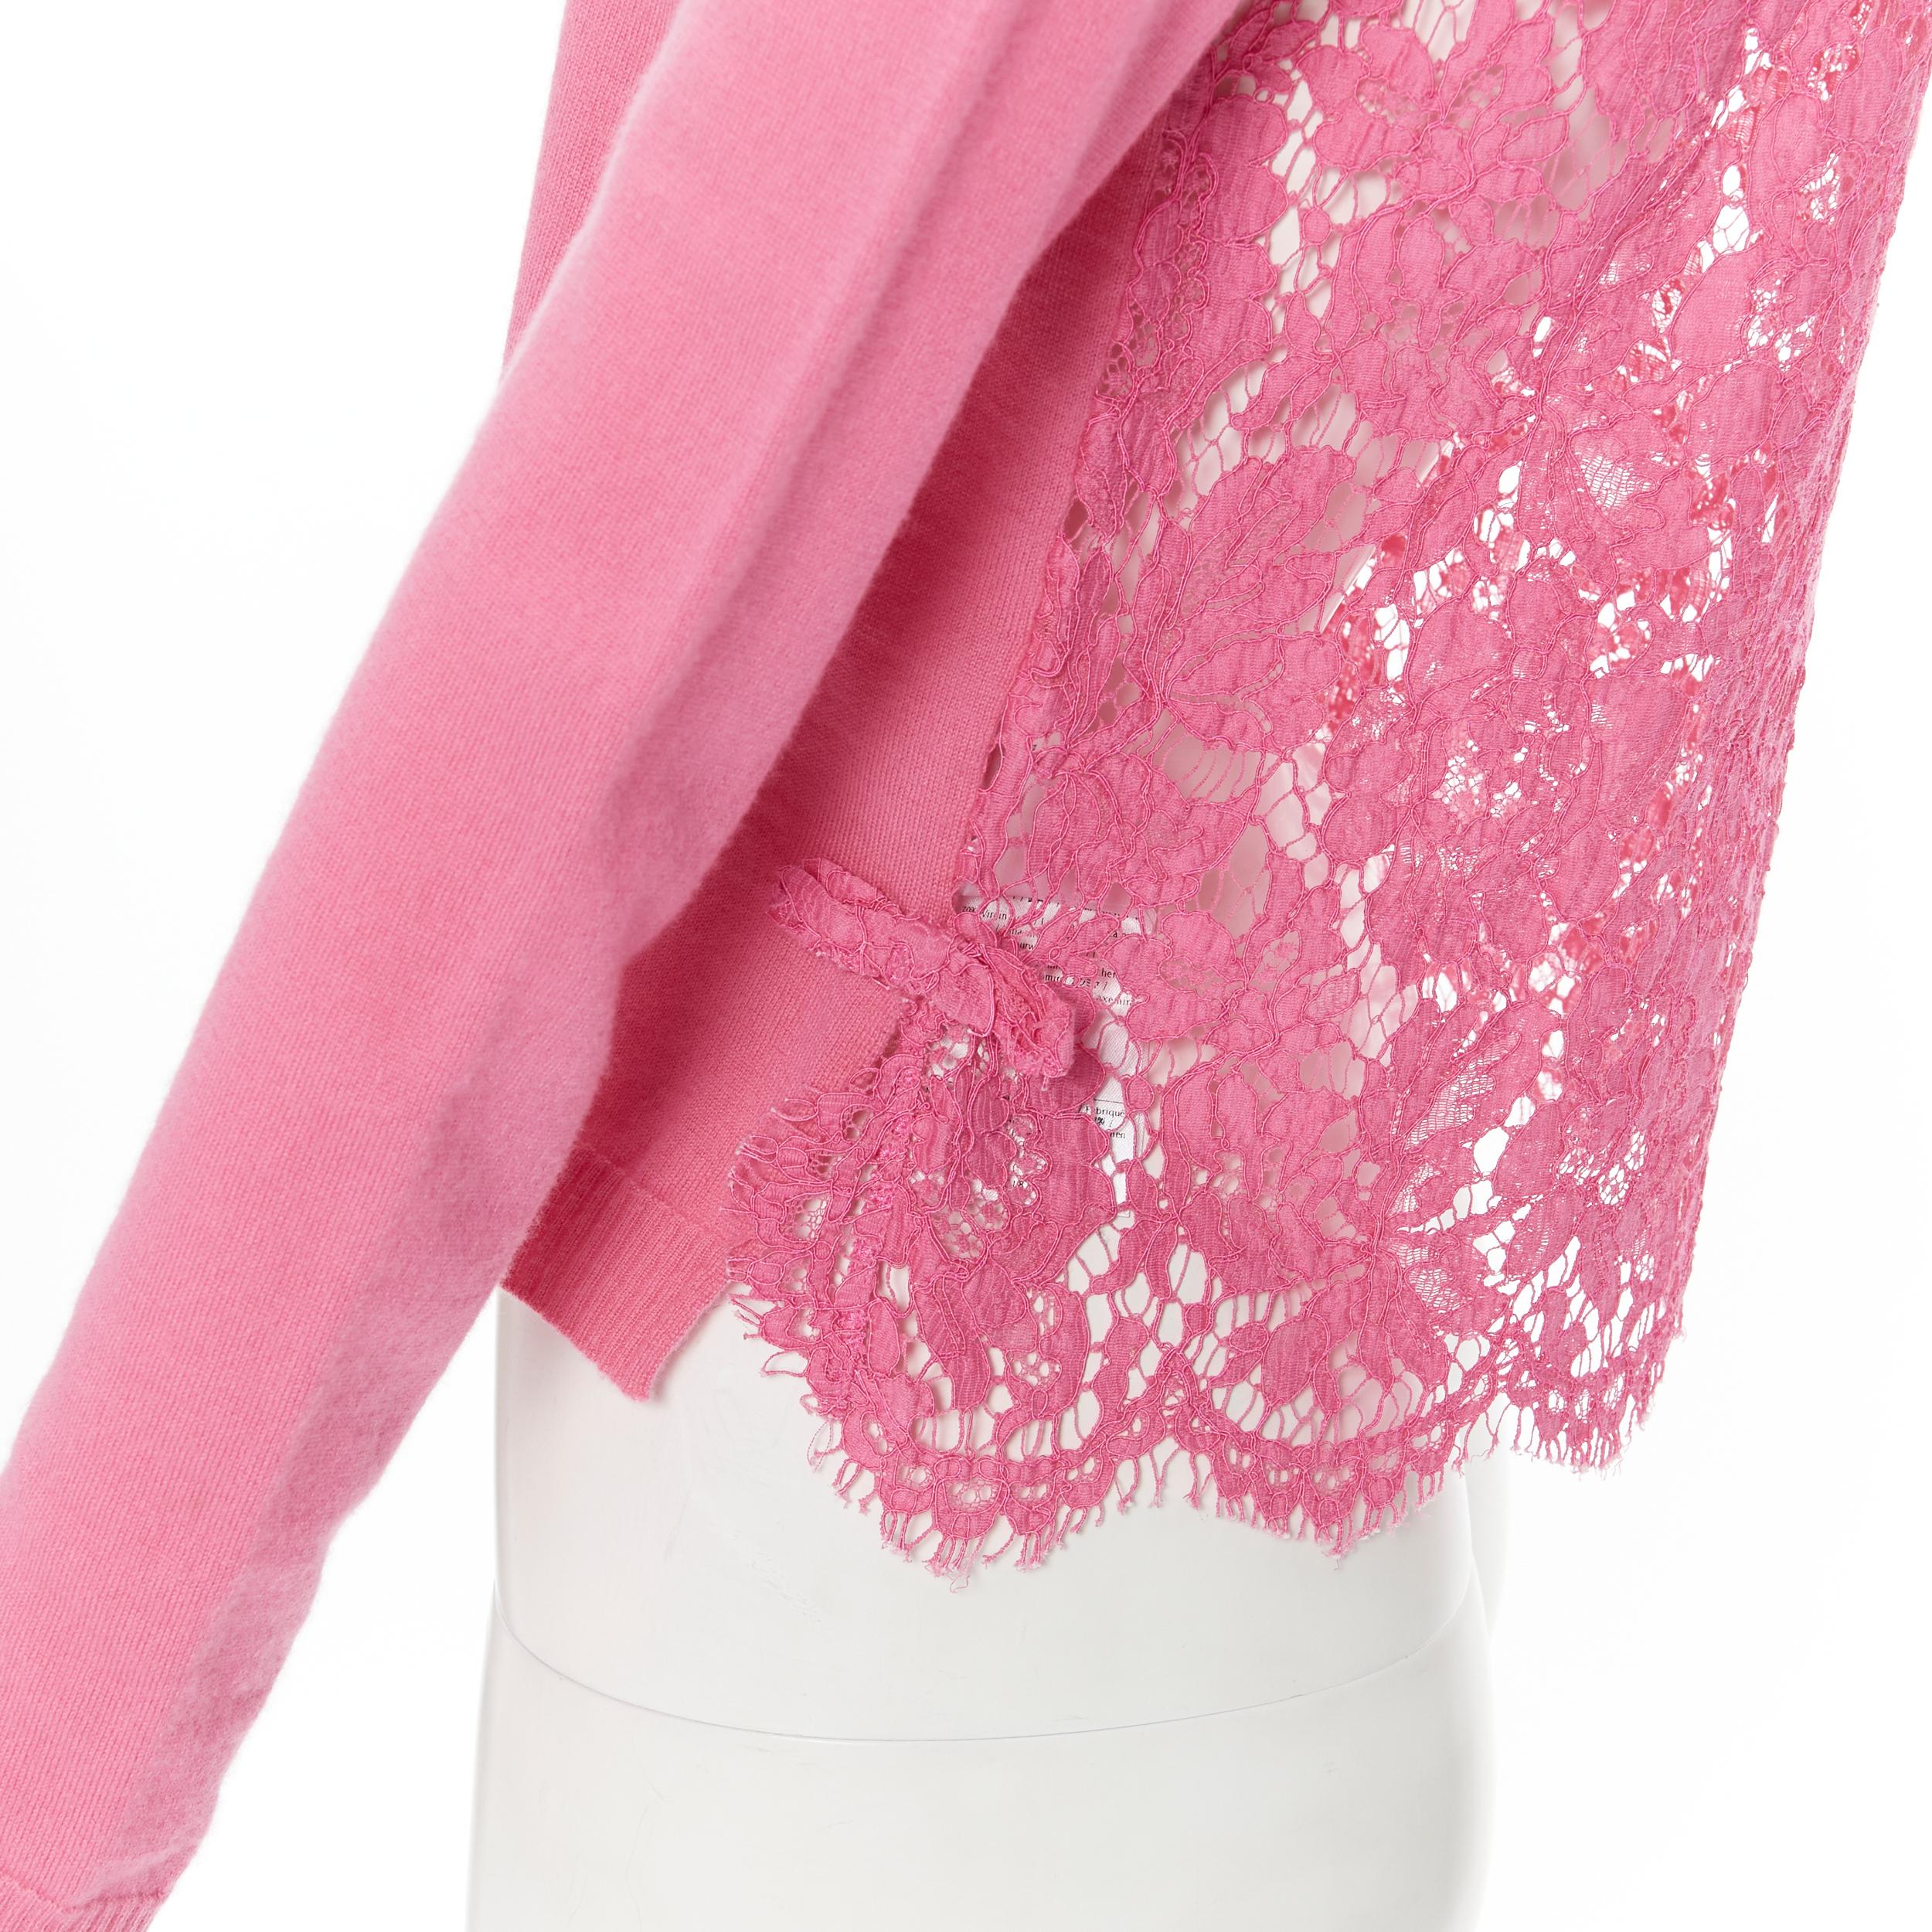 VALENTINO pink wool cashmere floral lace back ribbon bow cropped sweater S Reference: LNKO/A01826 Brand: Valentino Material: Cashmere Color: Pink Pattern: Solid Extra Detail: Lace back. Bow detail on side. Crew neck. Made in: Italy CONDITION: